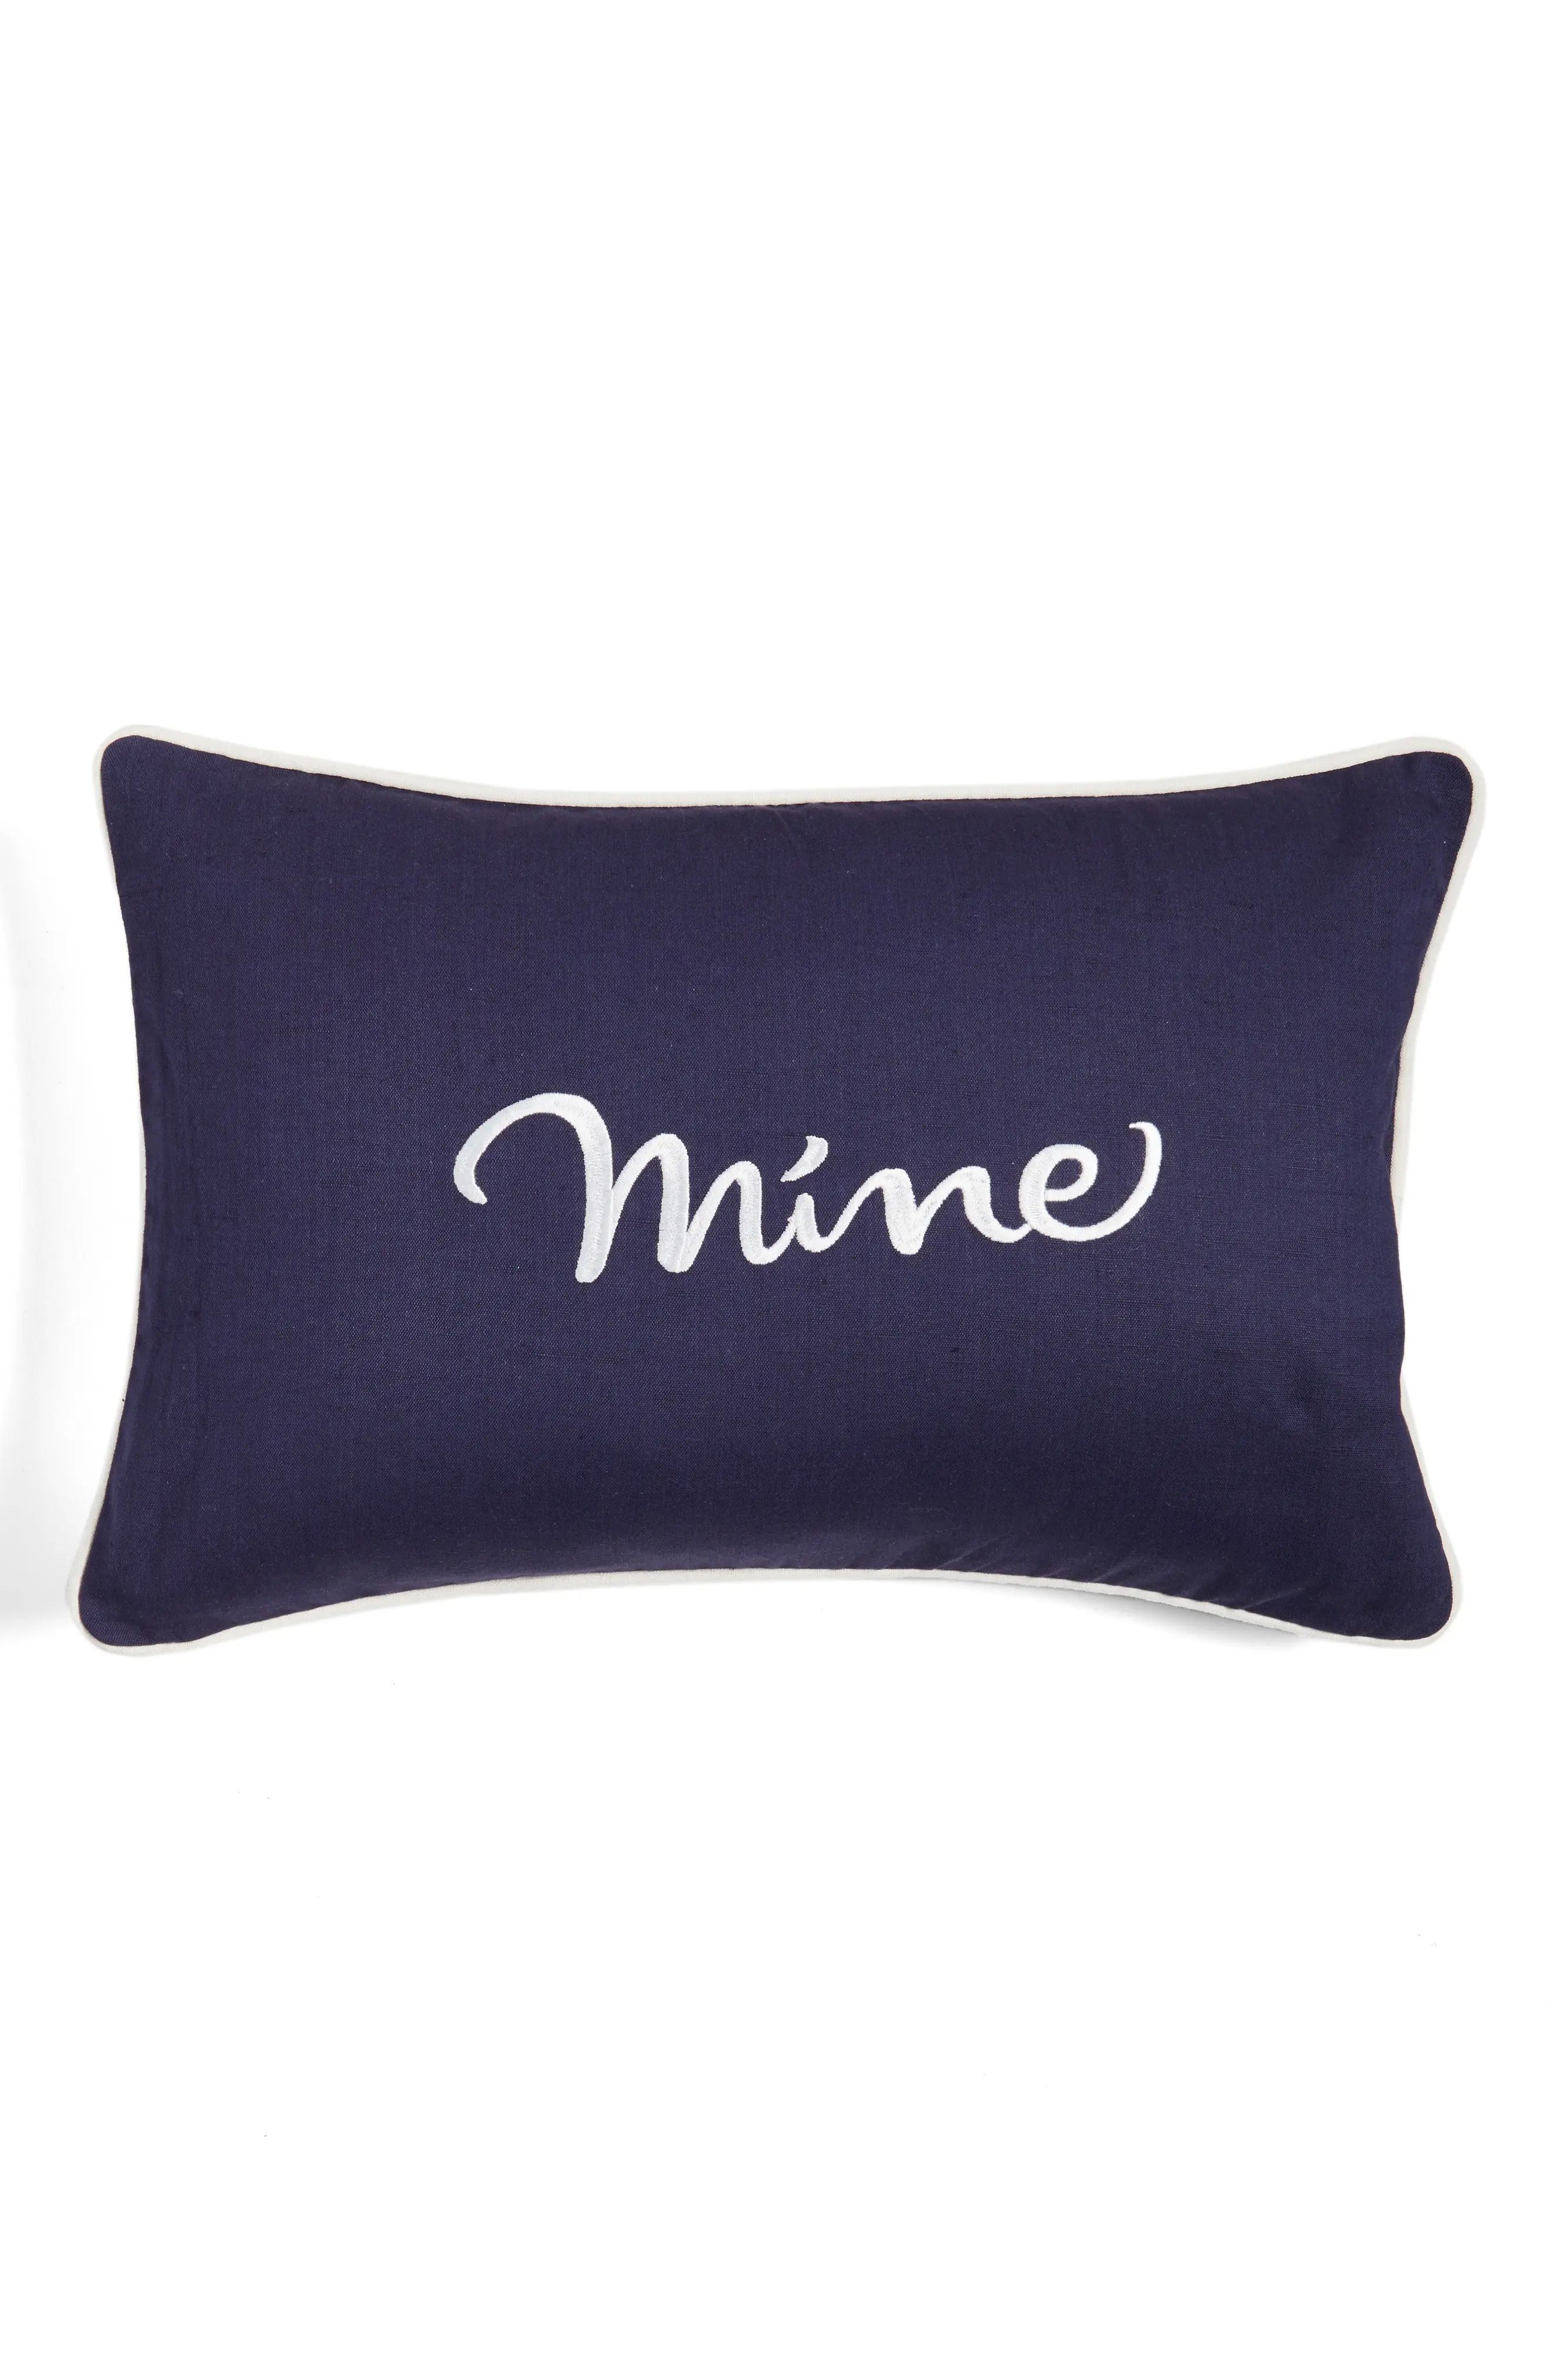 mine/yours accent pillow | Nordstrom